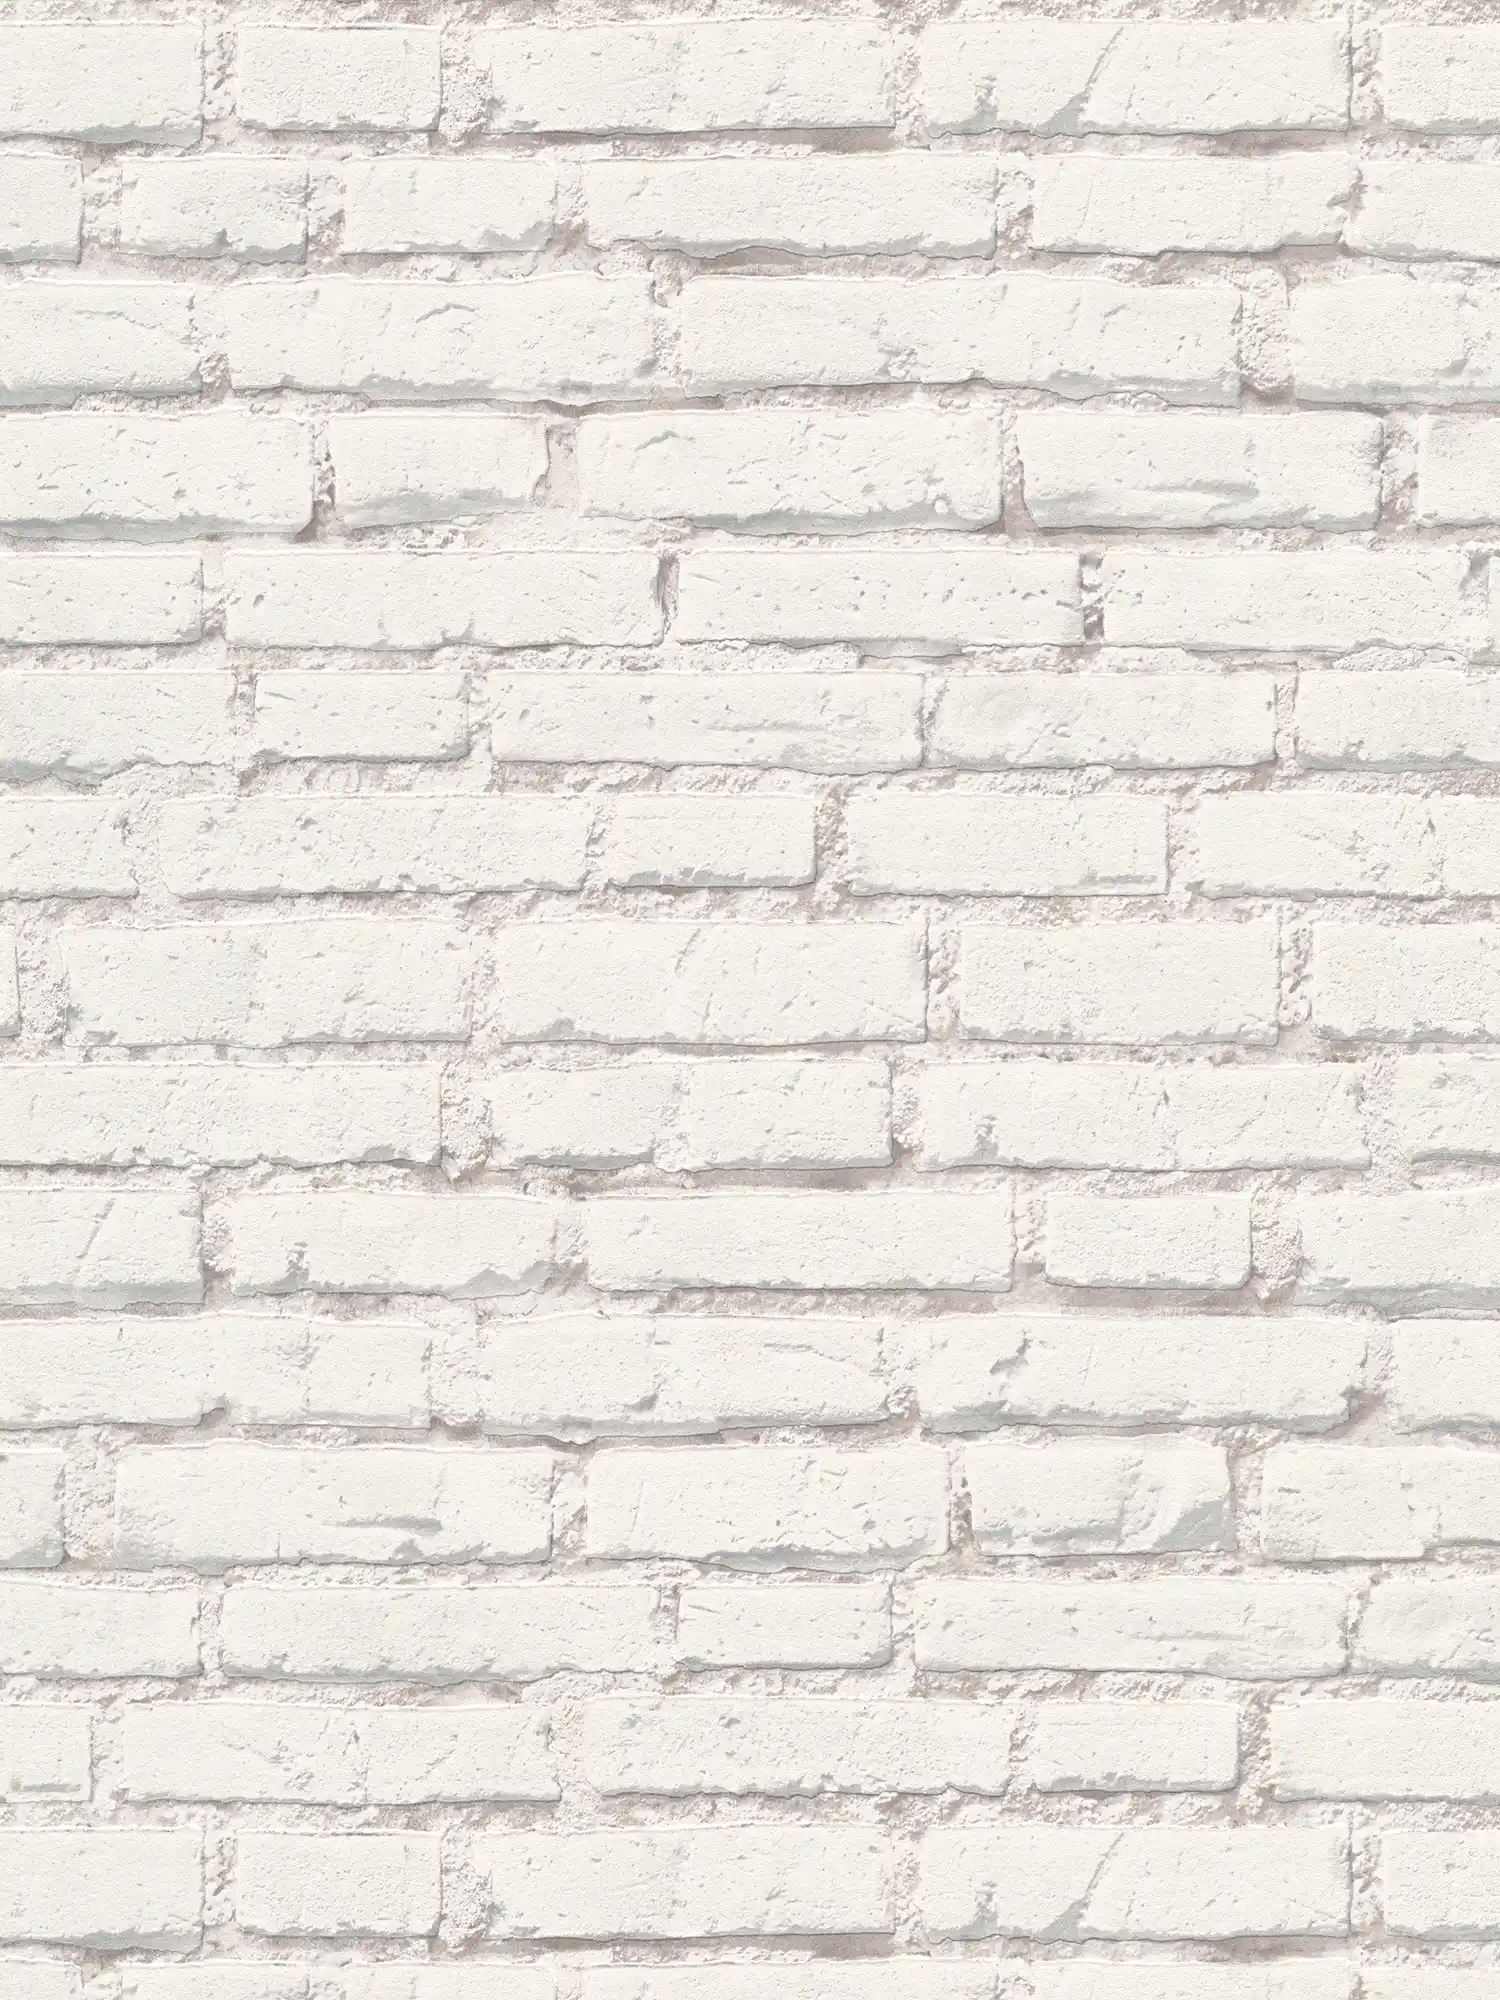 Wallpaper with brick wall with white stones and joints - white, grey
